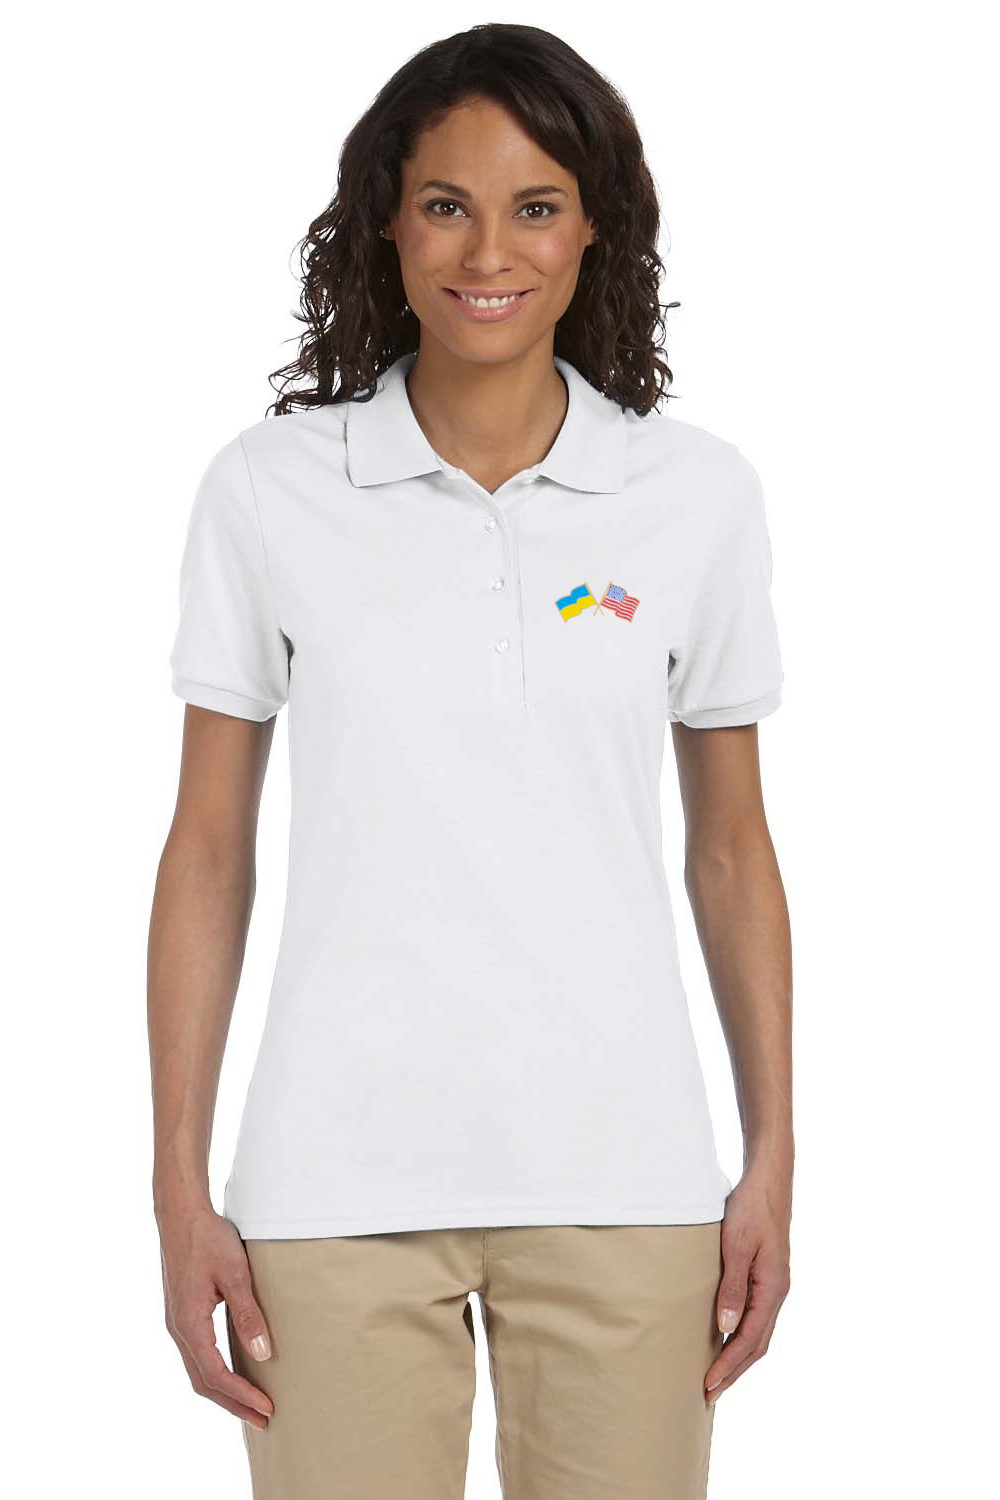 Women's polo shirt with Ukrainian and American flags